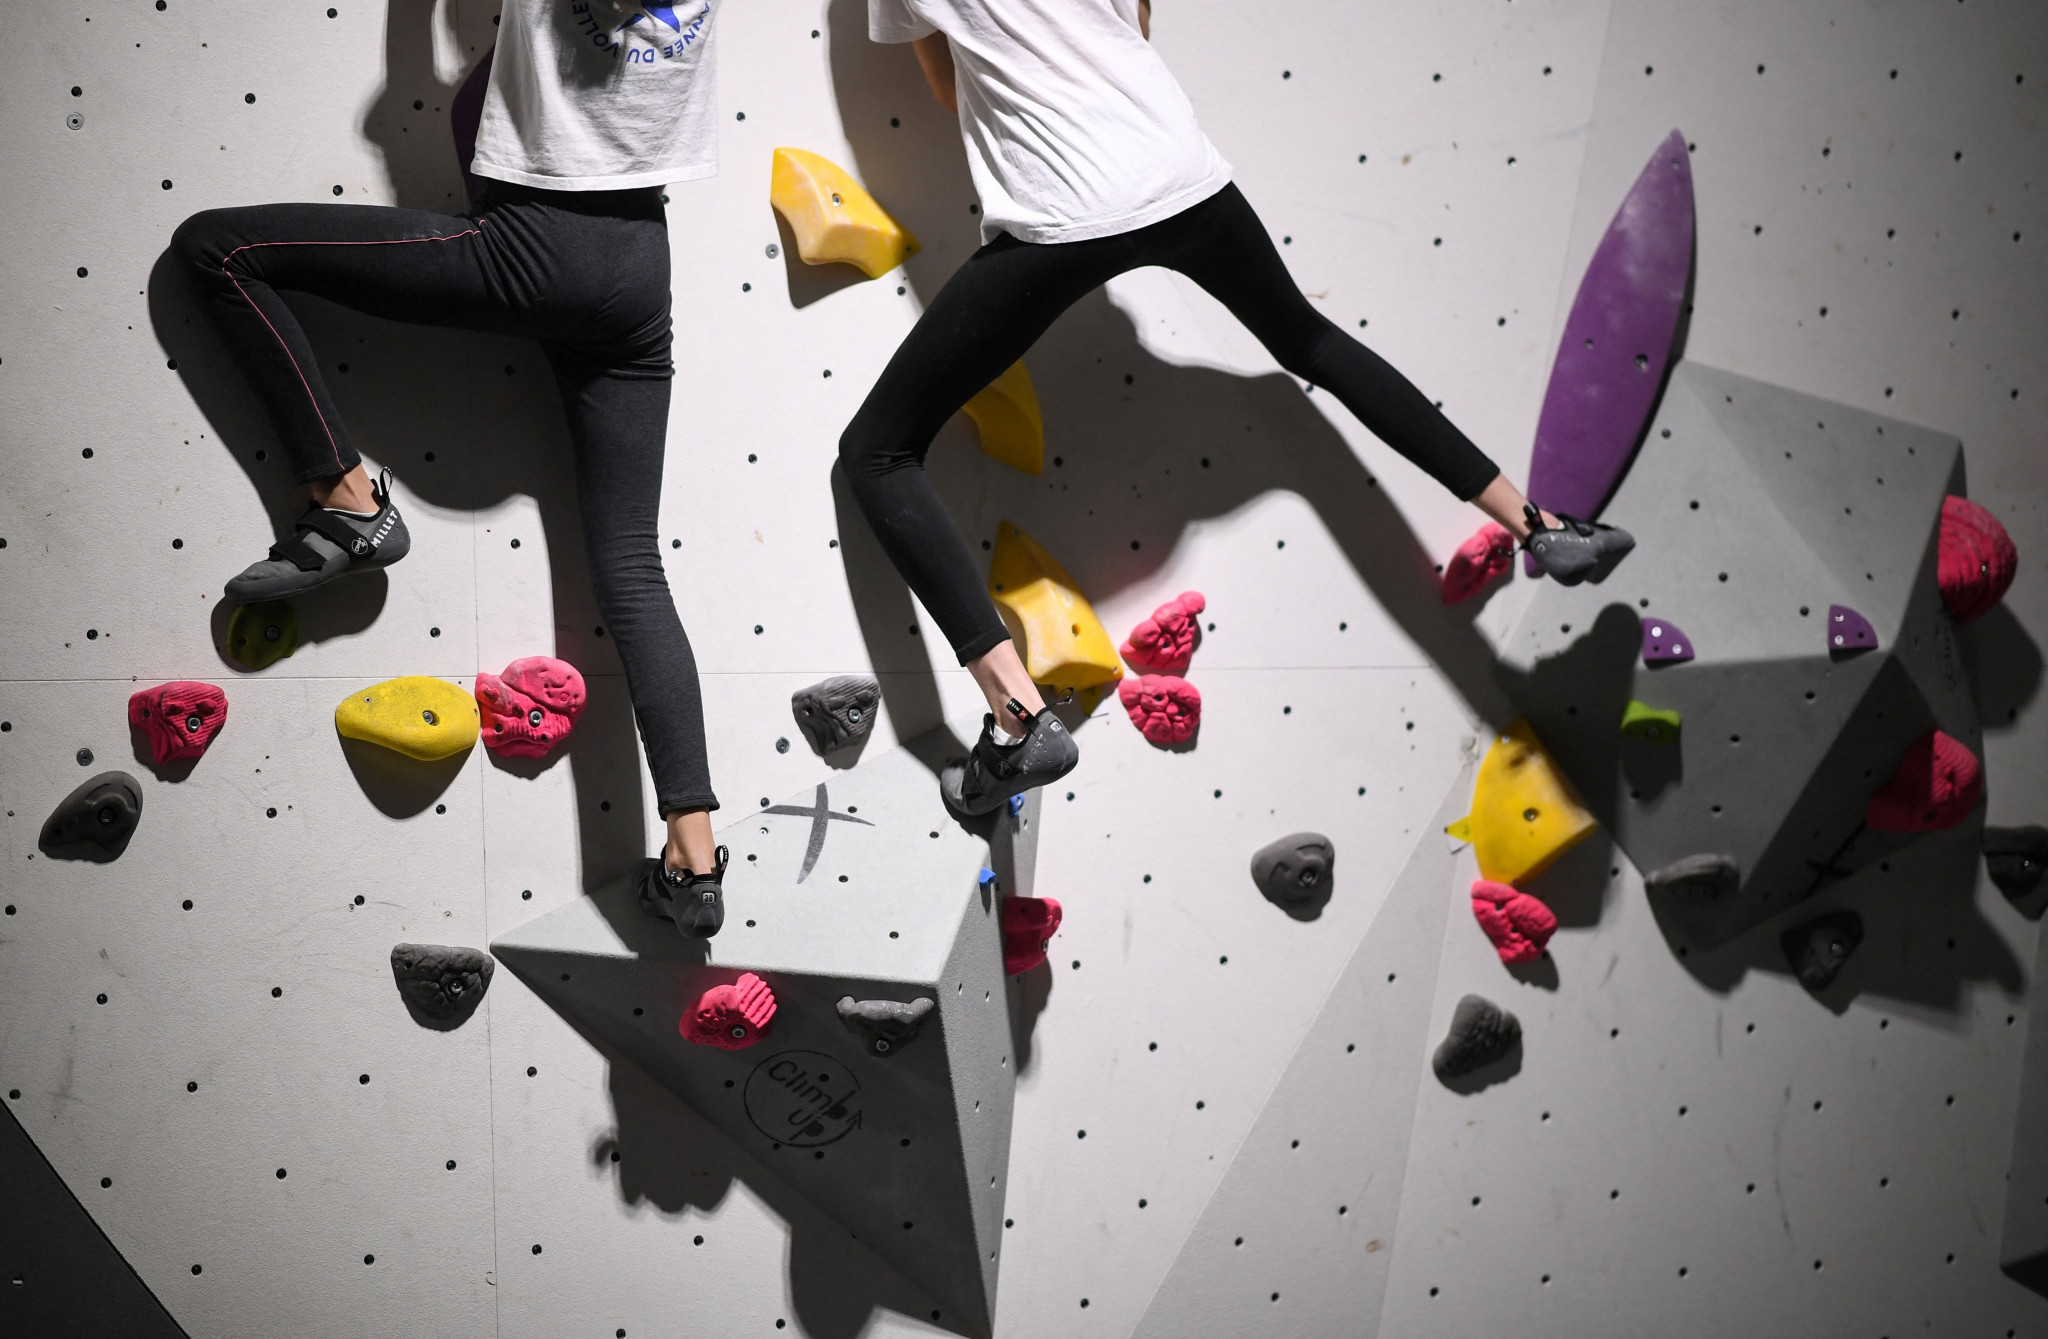 FISU is scheduled to hold the World University Championships Sport Climbing in June ©Getty Images